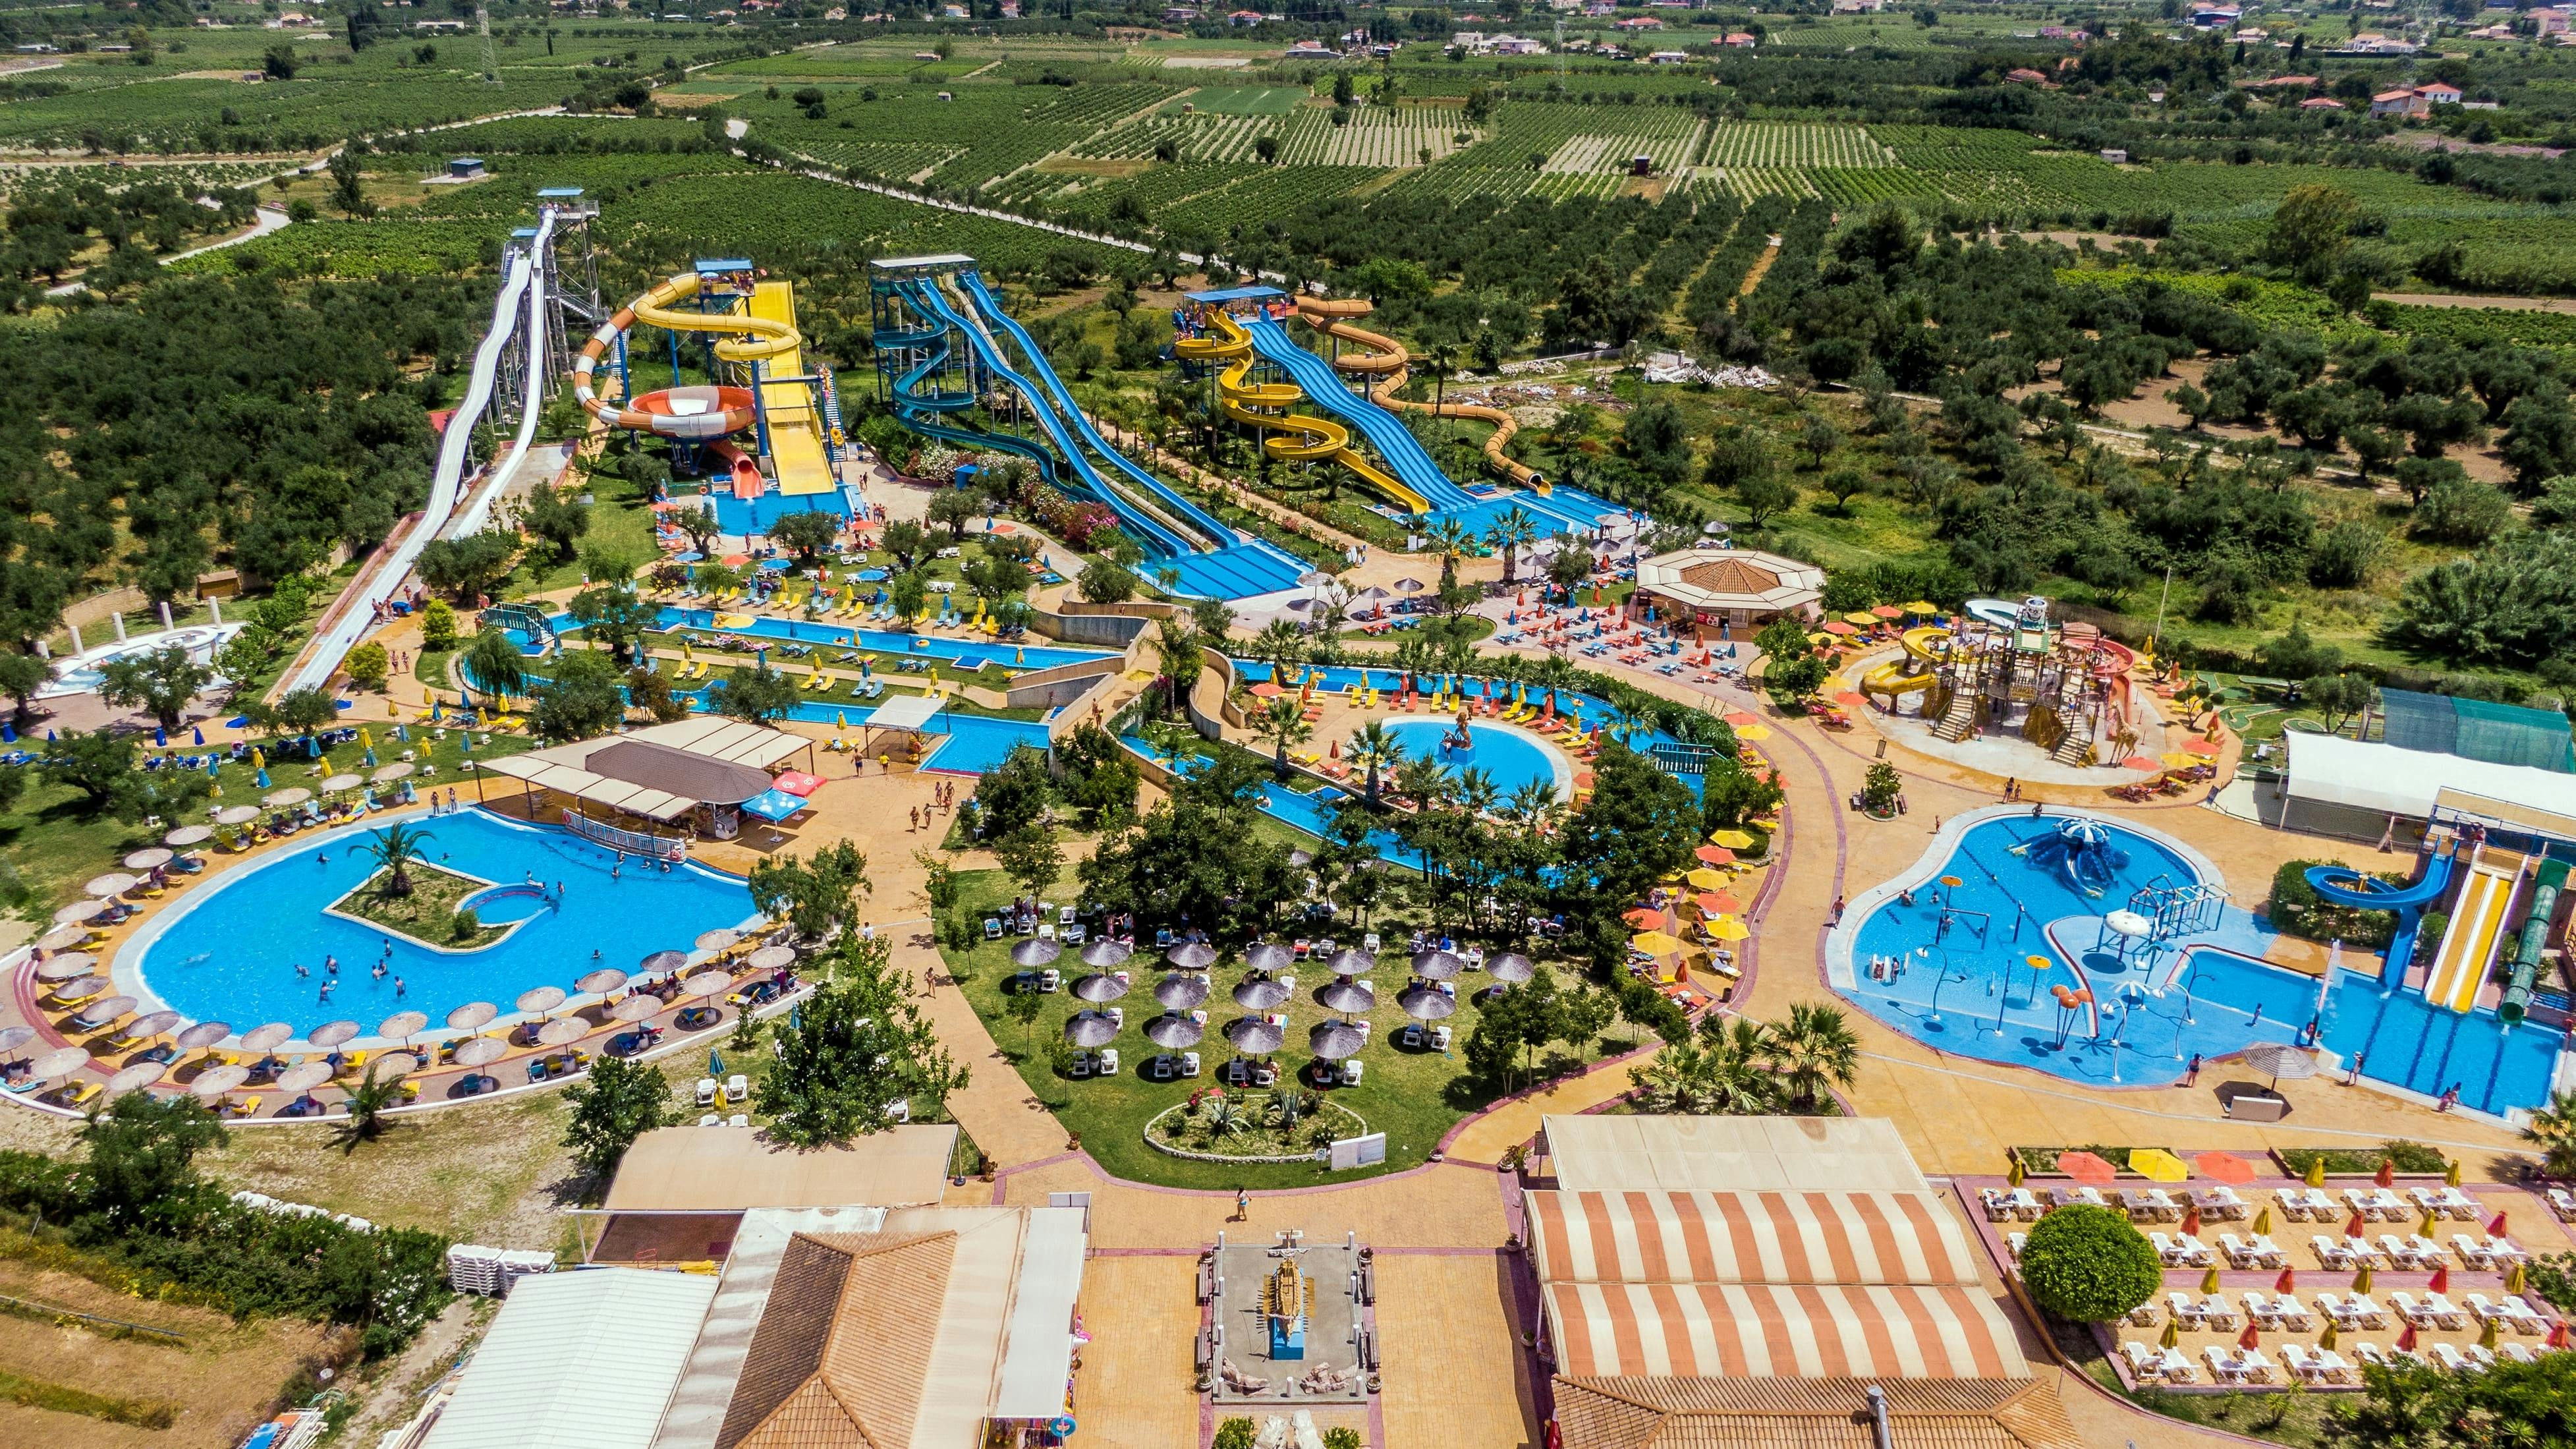 Watervillage Waterpark from Laganas